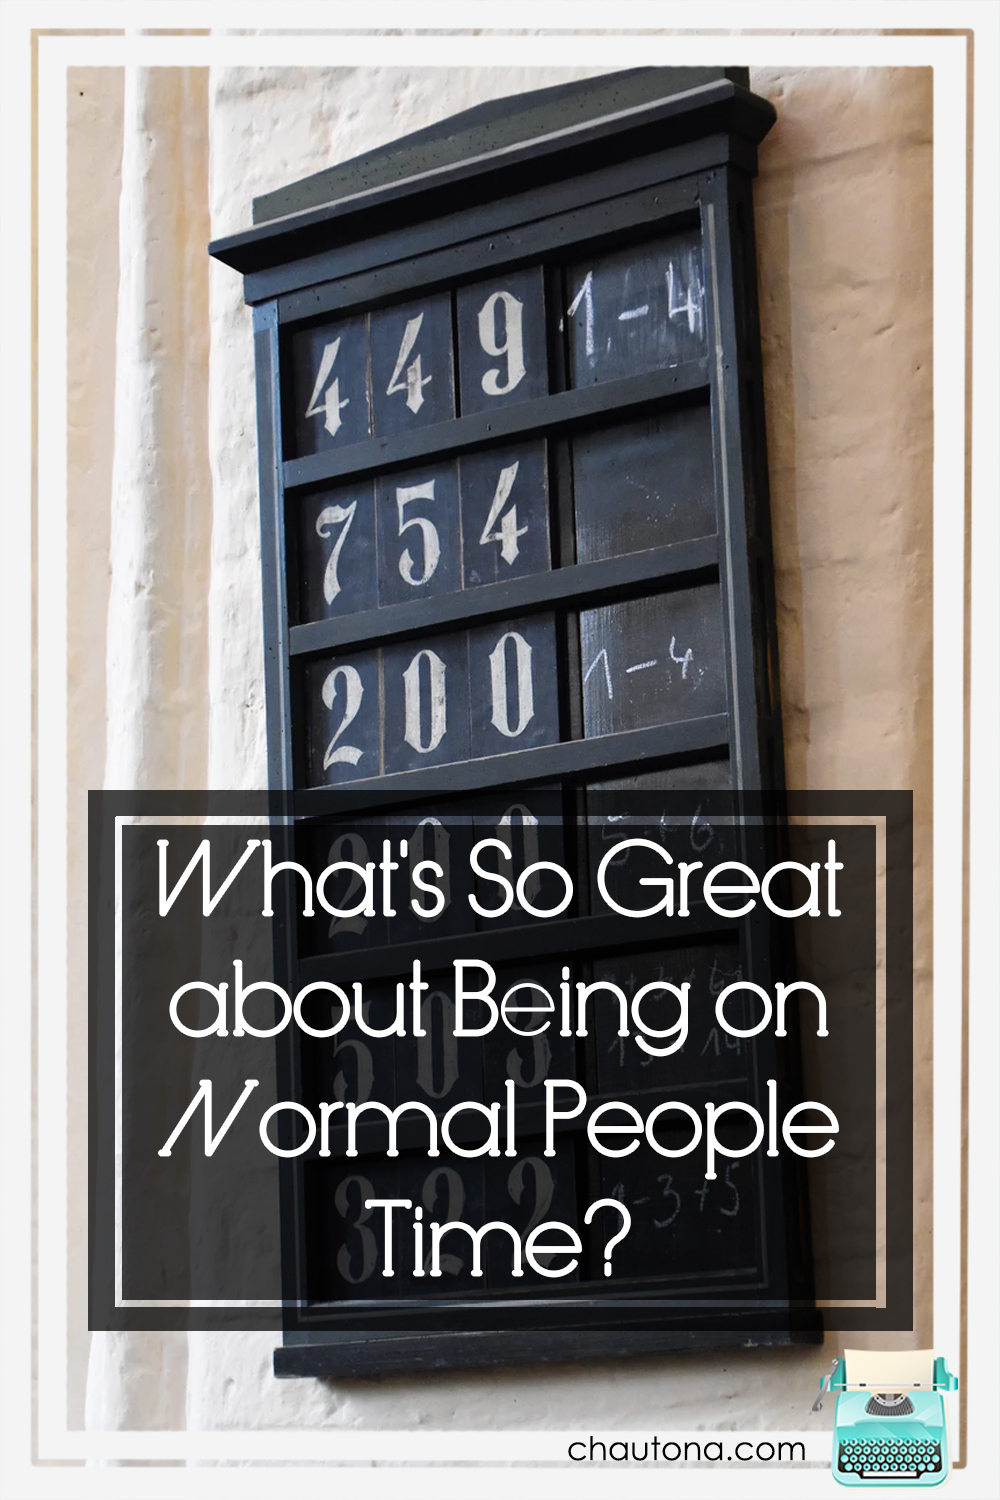 What's So Great about Being on Normal People Time?